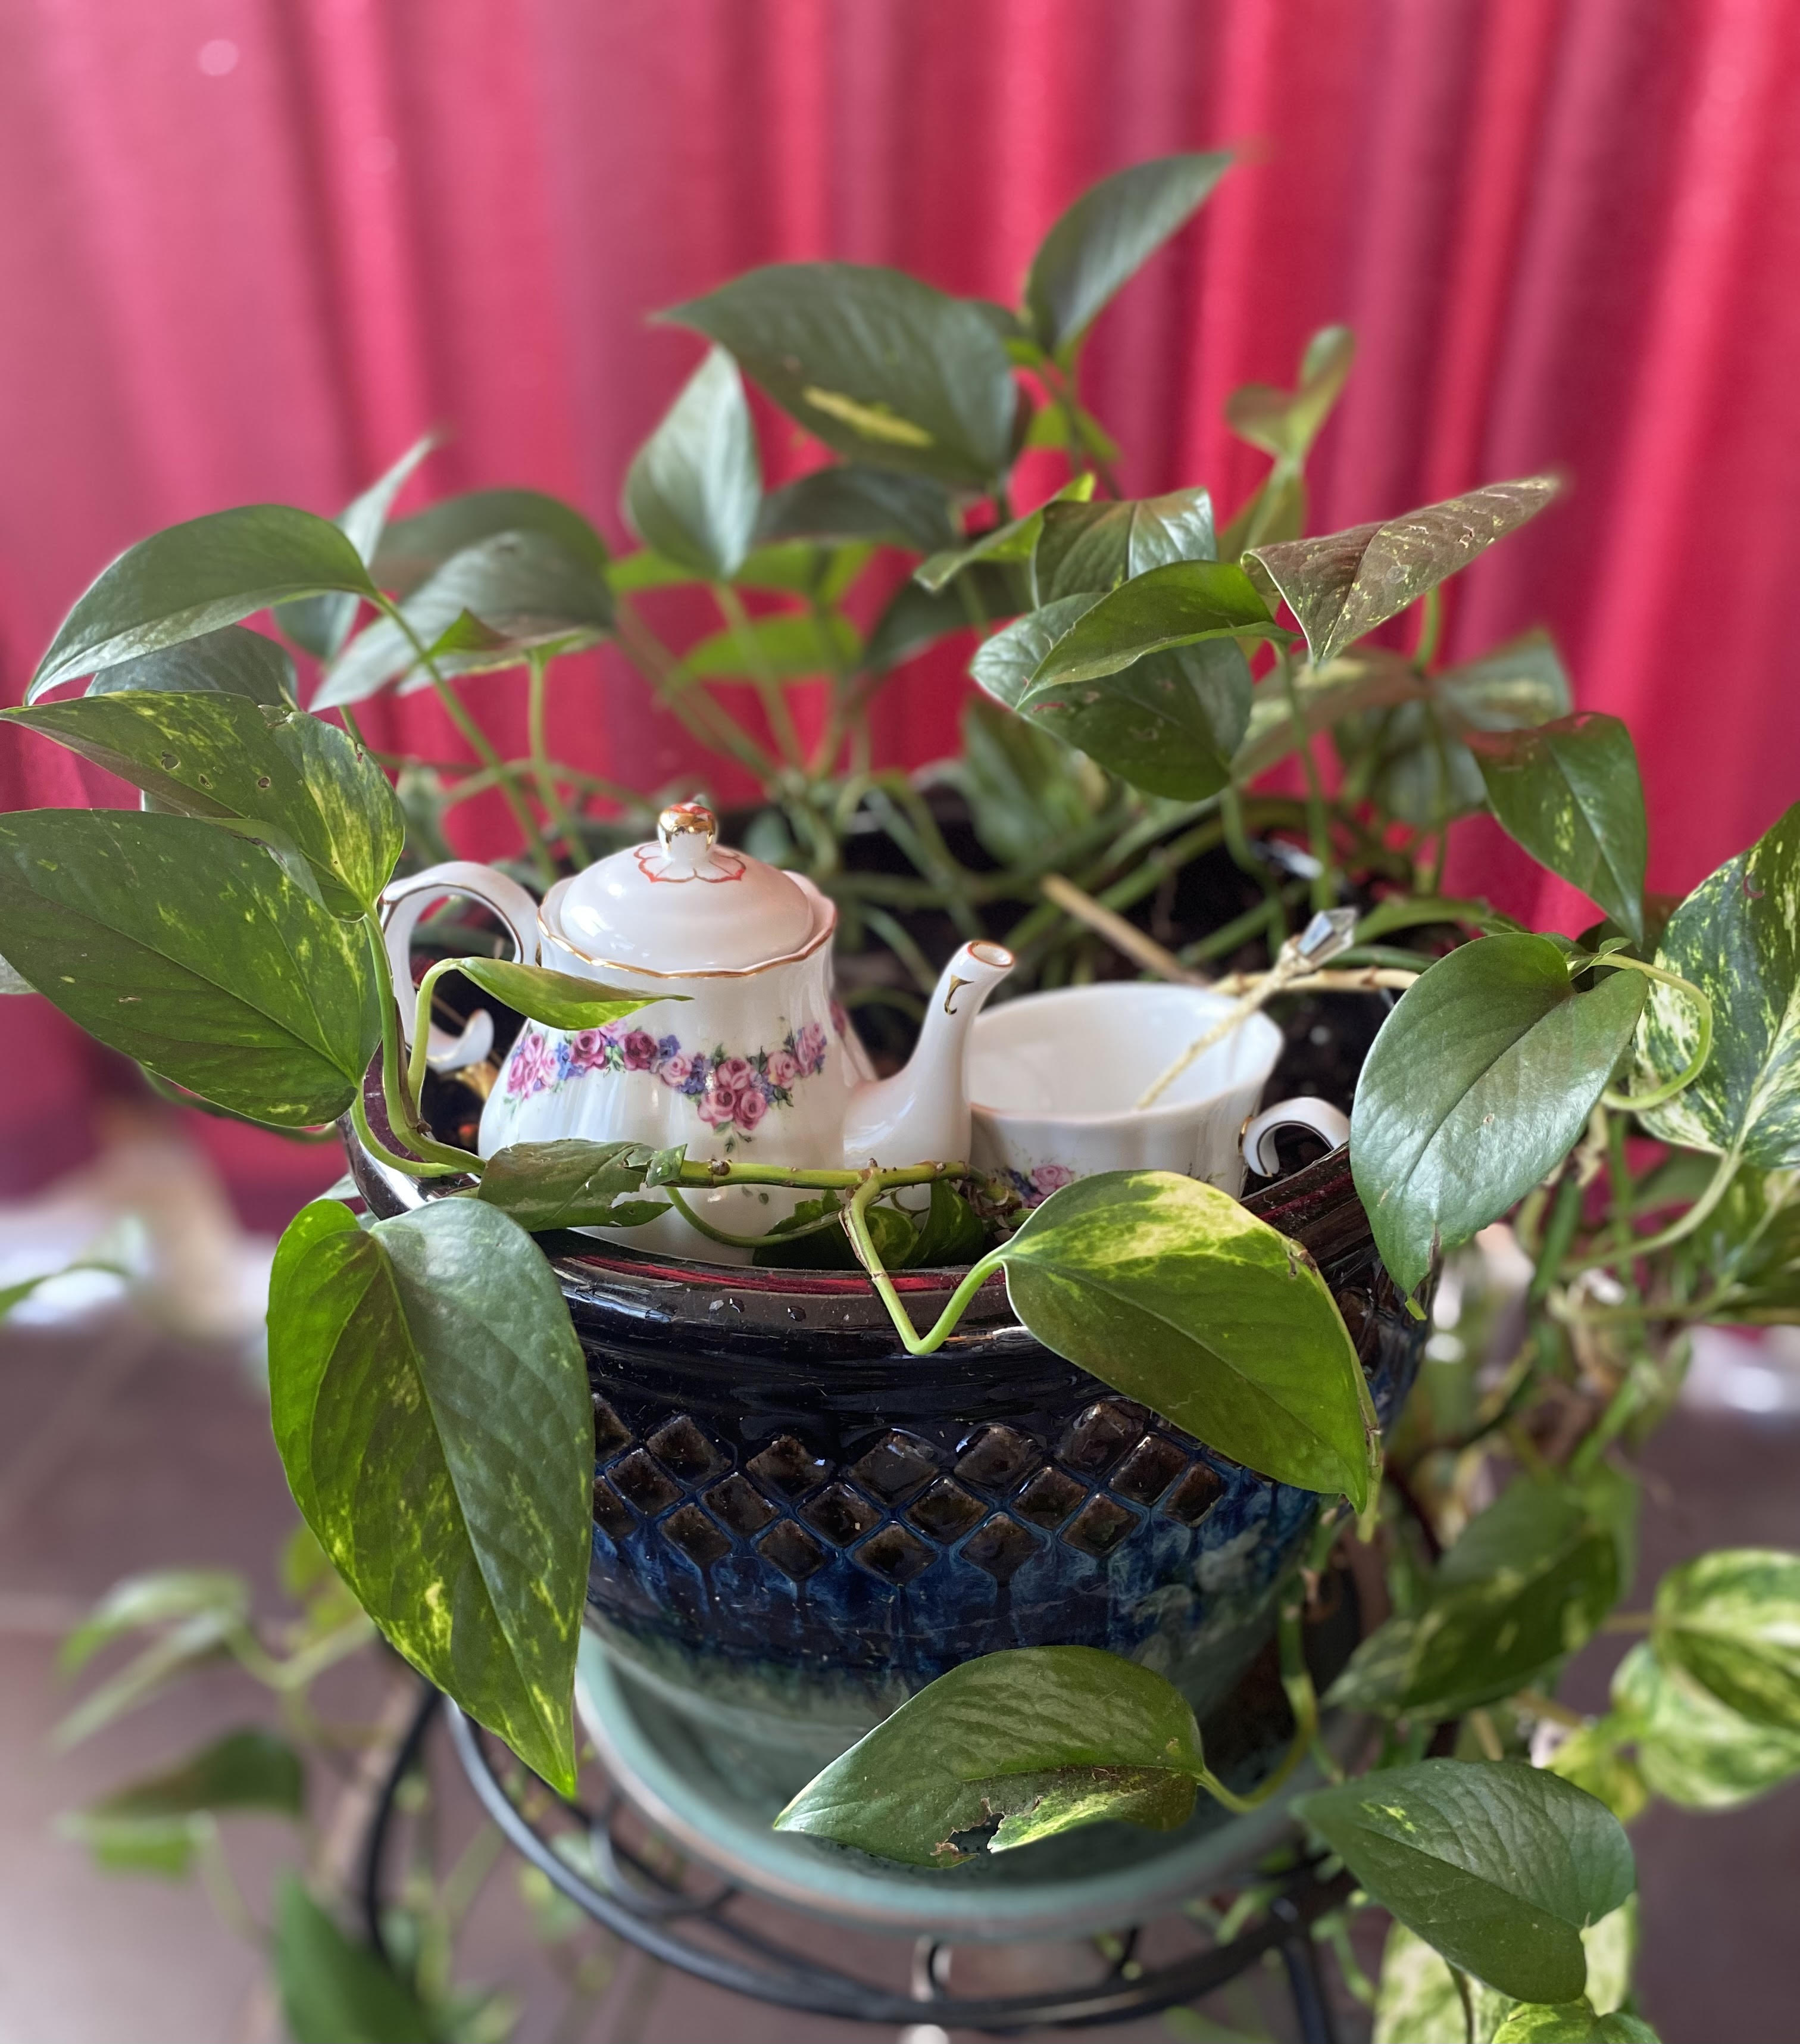 Houseplant with Tea Kettle and Tea Cup